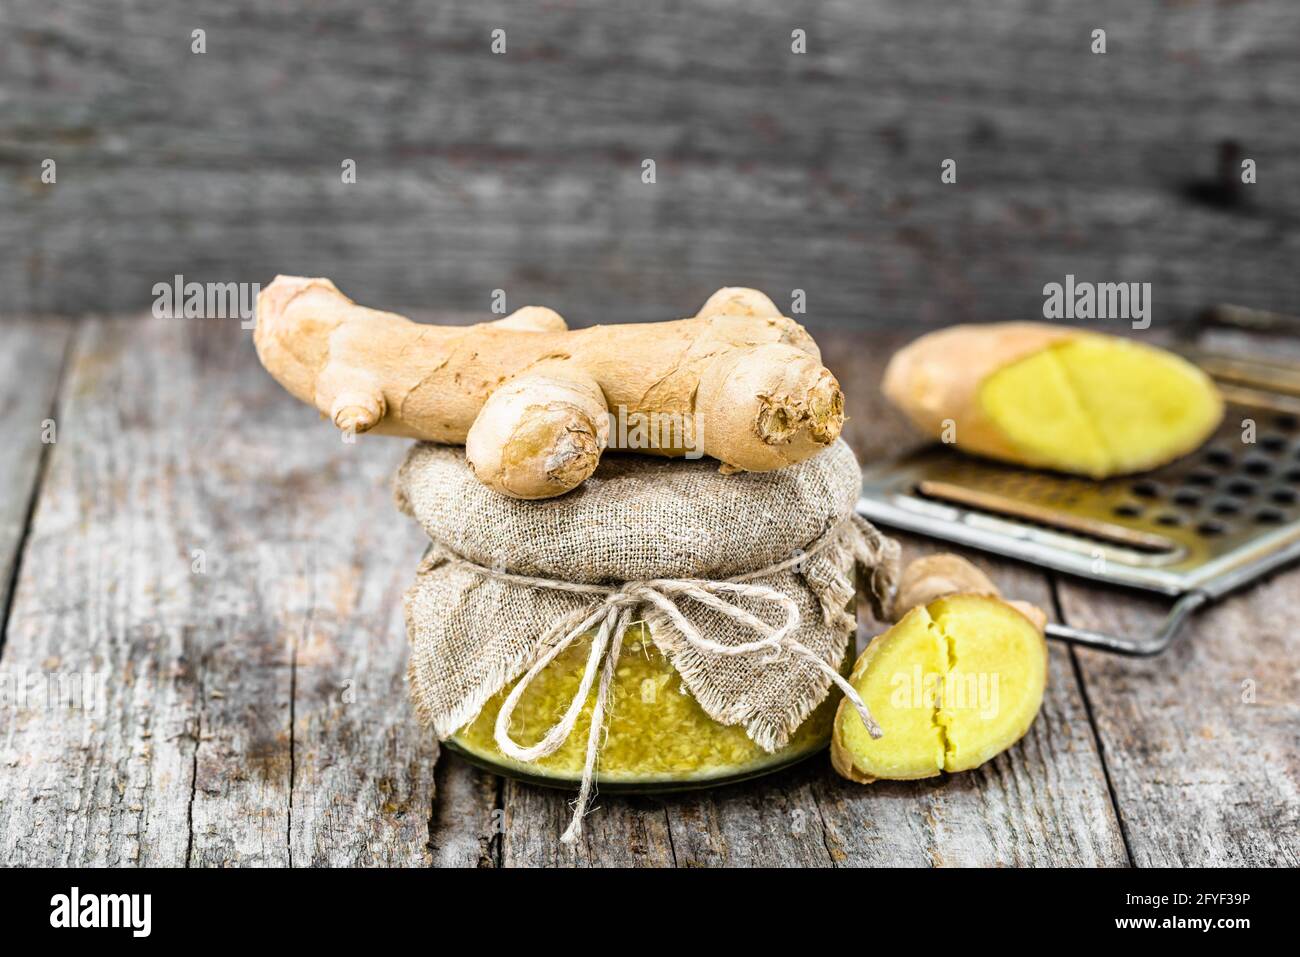 Grated ginger in a glass jar, spice for self treatment, seasoning ingredient in cuisine Stock Photo